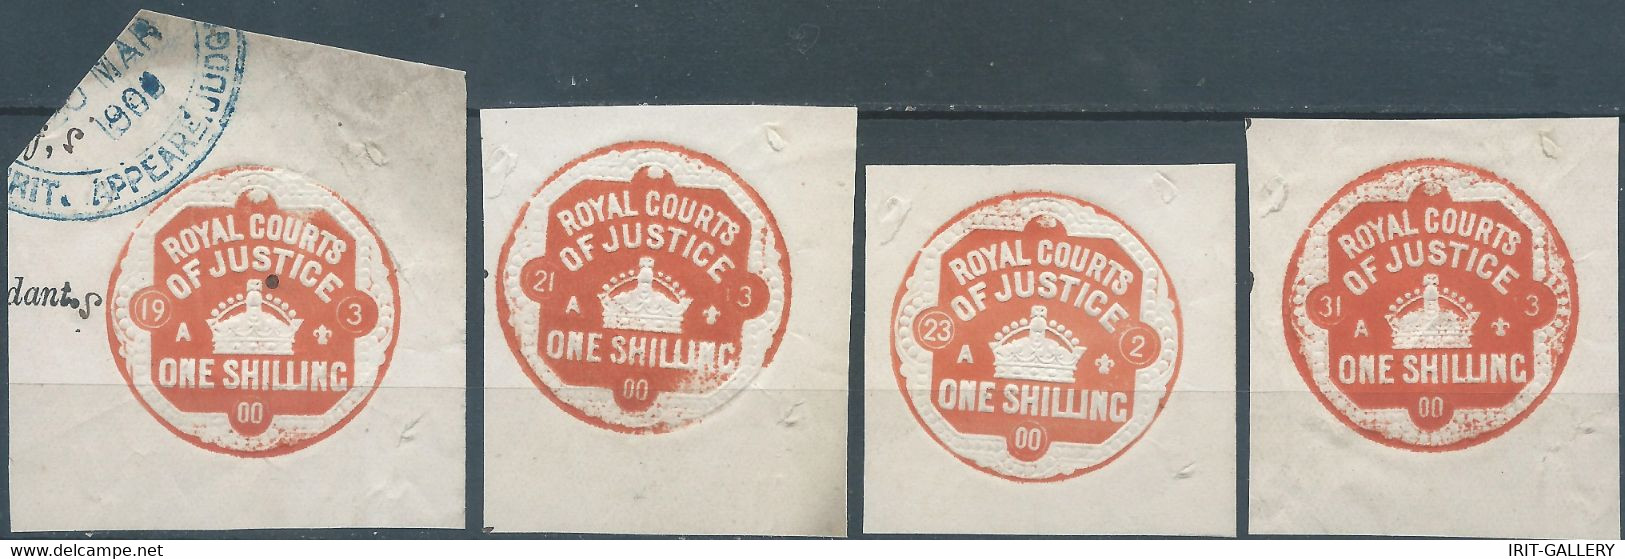 Great Britain-ENGLAND,1900 ,ROYAL COURTS OF JUSTICE, Tax Fee,Different Date Of The Day Of The Month,1 SHILLING - Fiscale Zegels